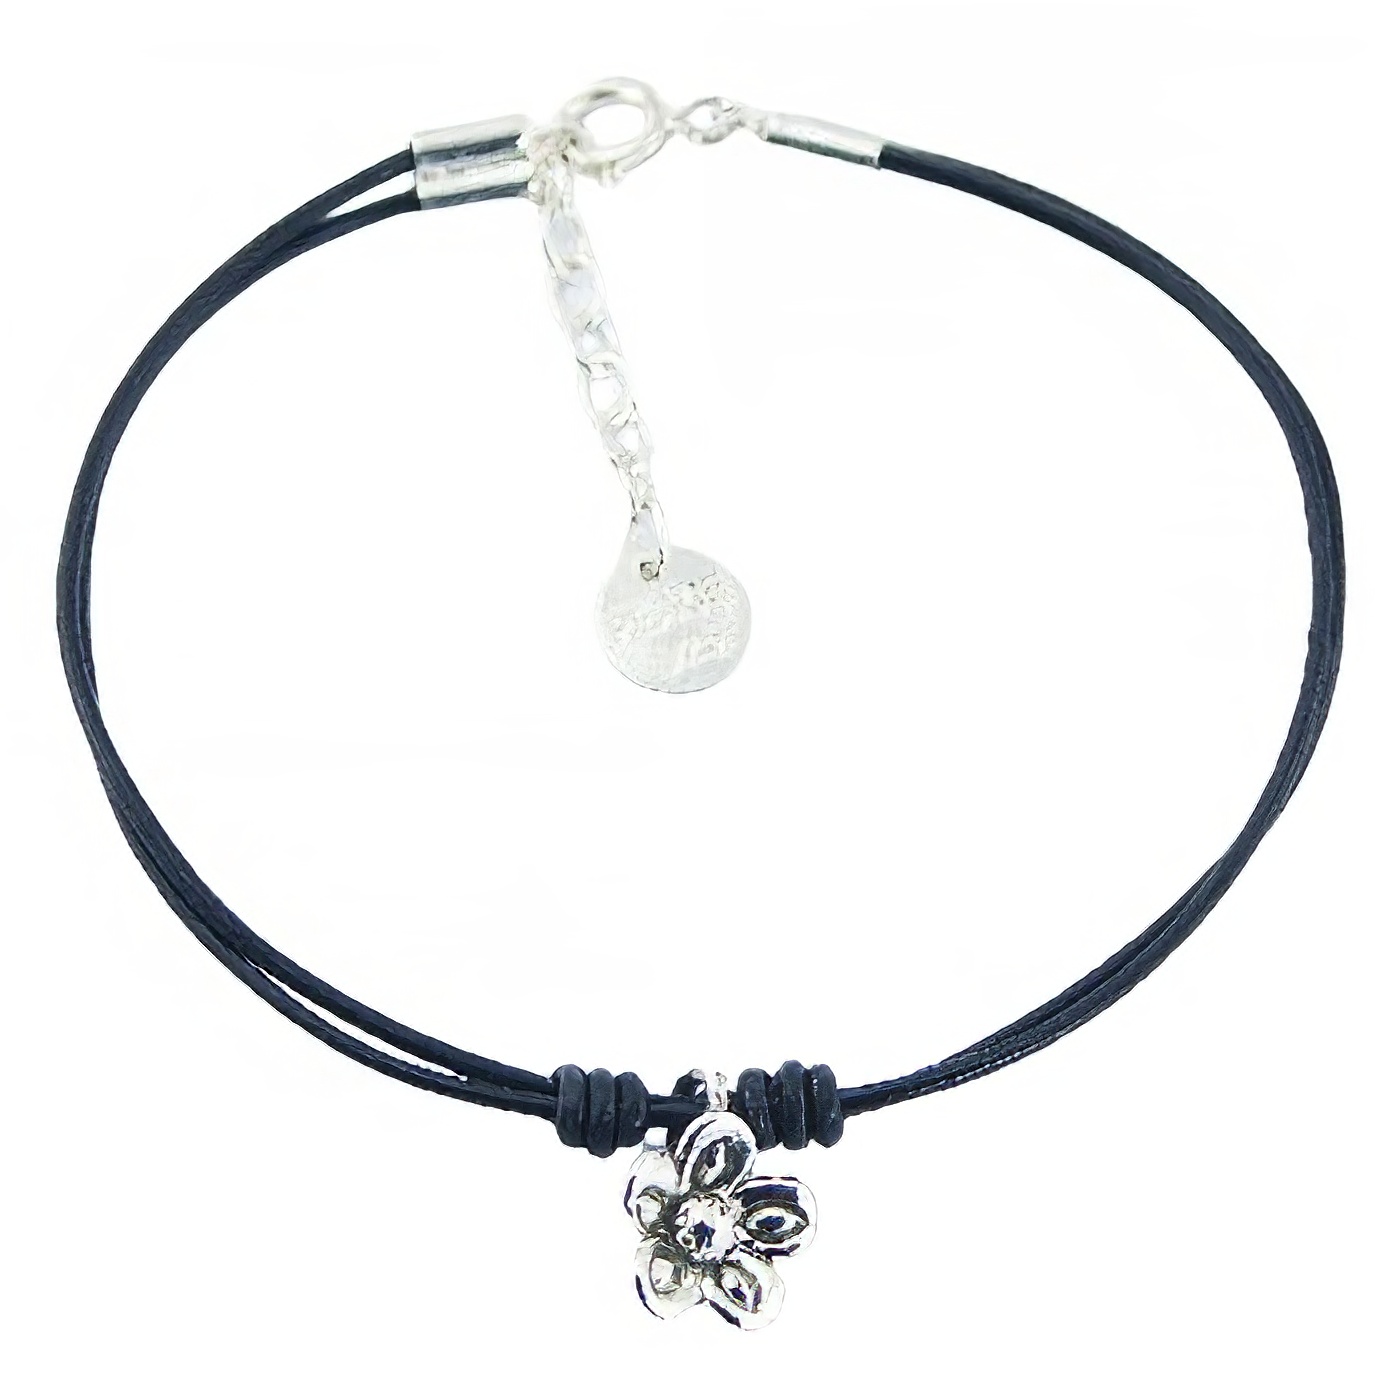 Cute 925 Silver Flower Leather Bracelet Spring Clasp with Chain 